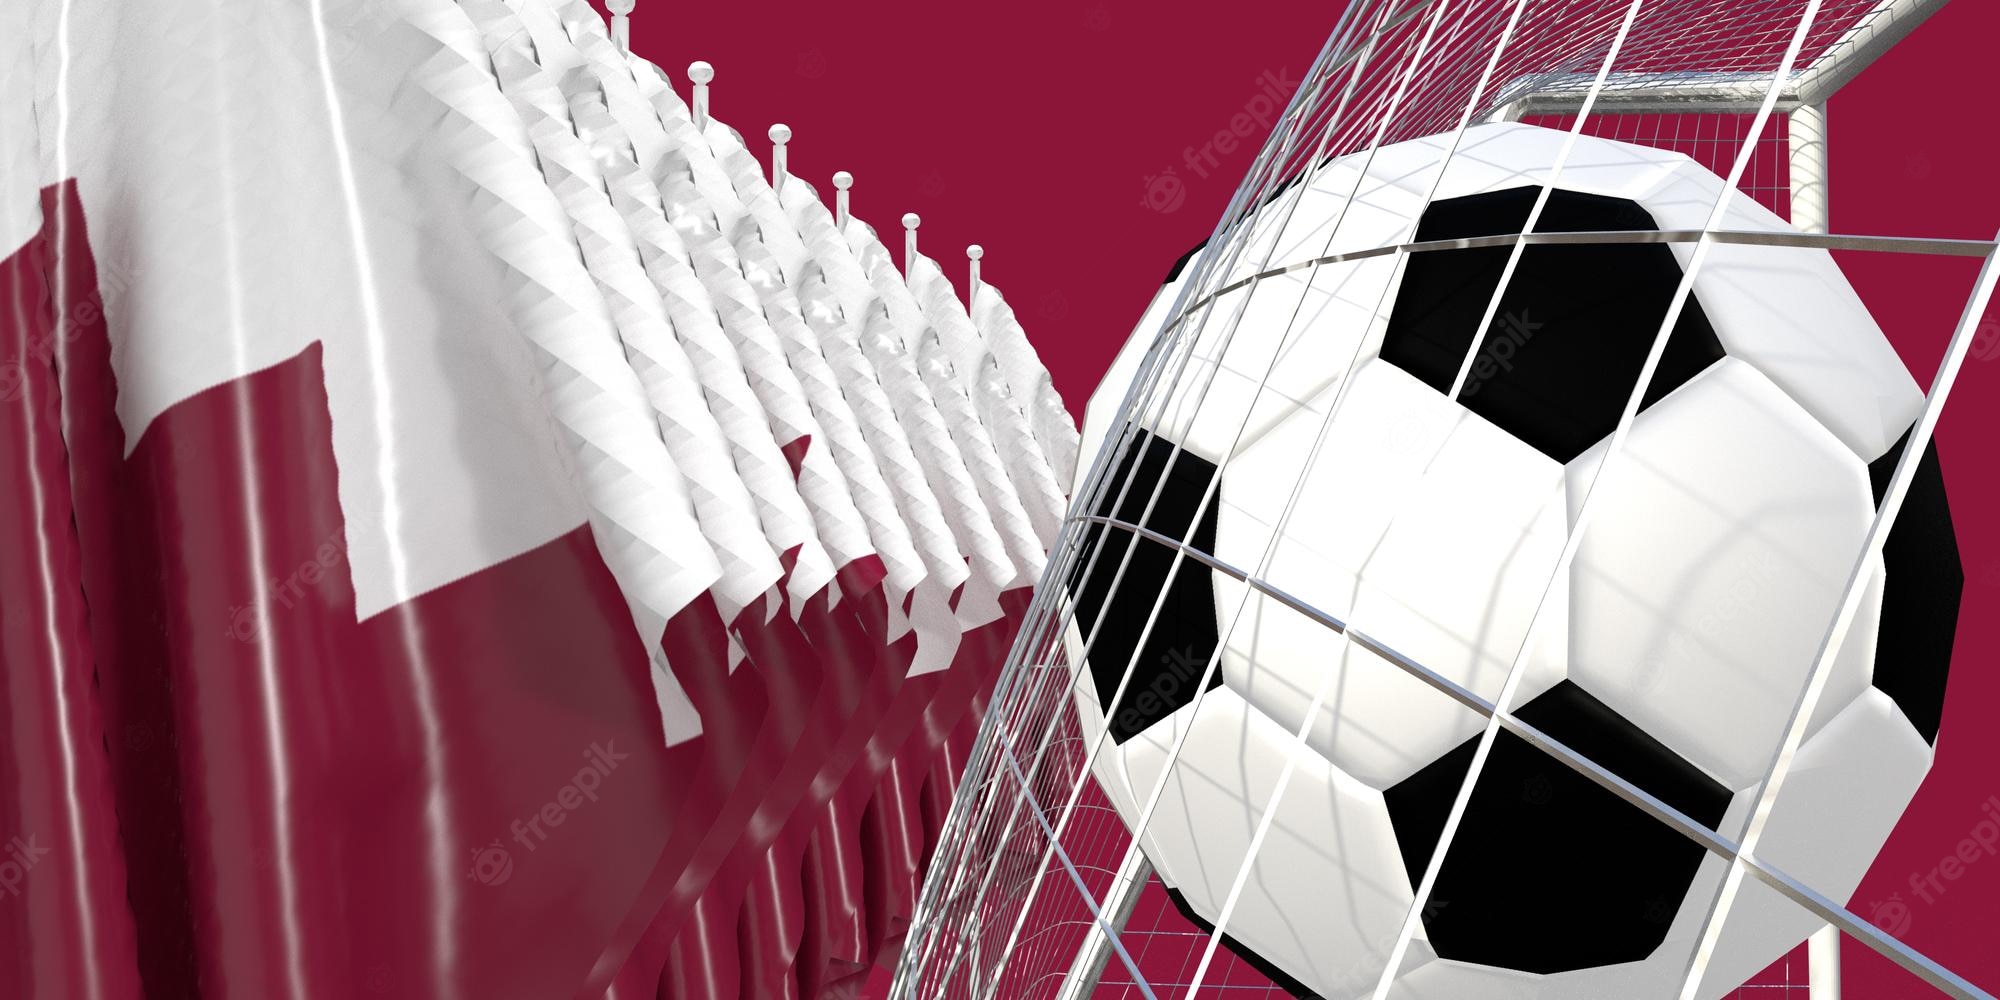 Premium Photo. Red white qatar dohar flag country background wallpaper copy space symbol football world cup emirate soccer sport qatar game 2022 event goal team champion arab islam nation day travel3D render